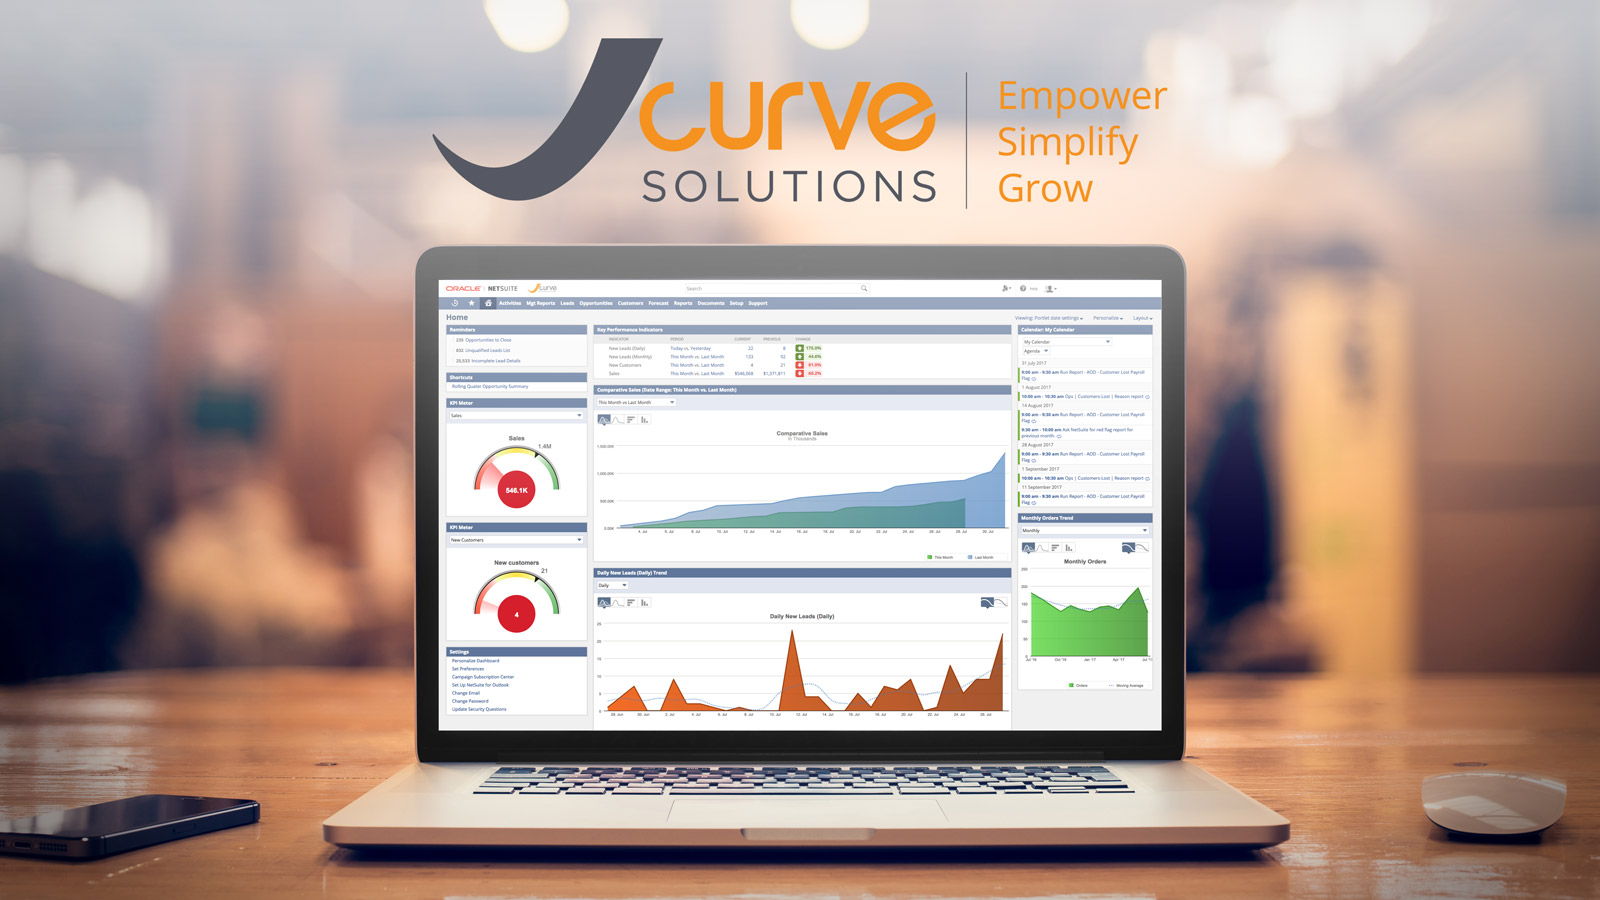 Shippit Has Partnered with JCurve Solutions to Help You Grow Smarter